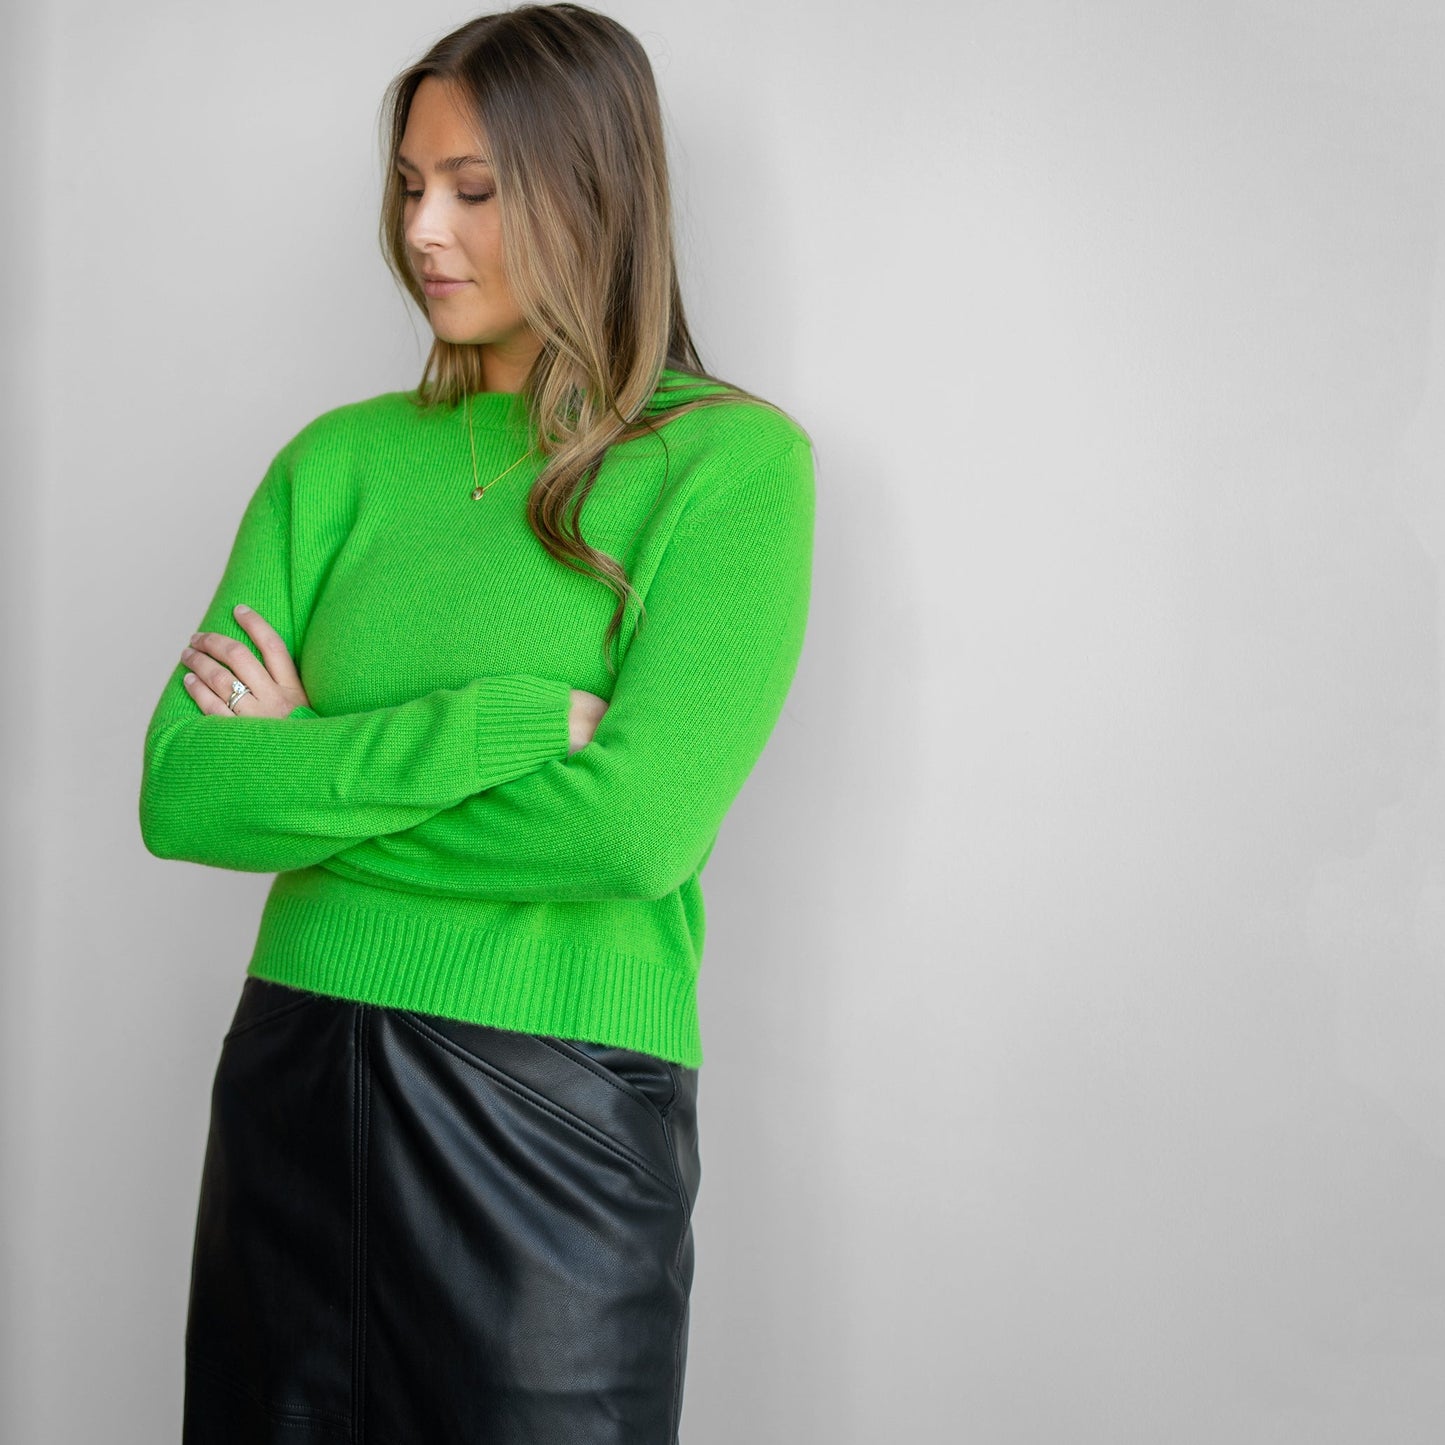 Mable Sweater in Evergreen